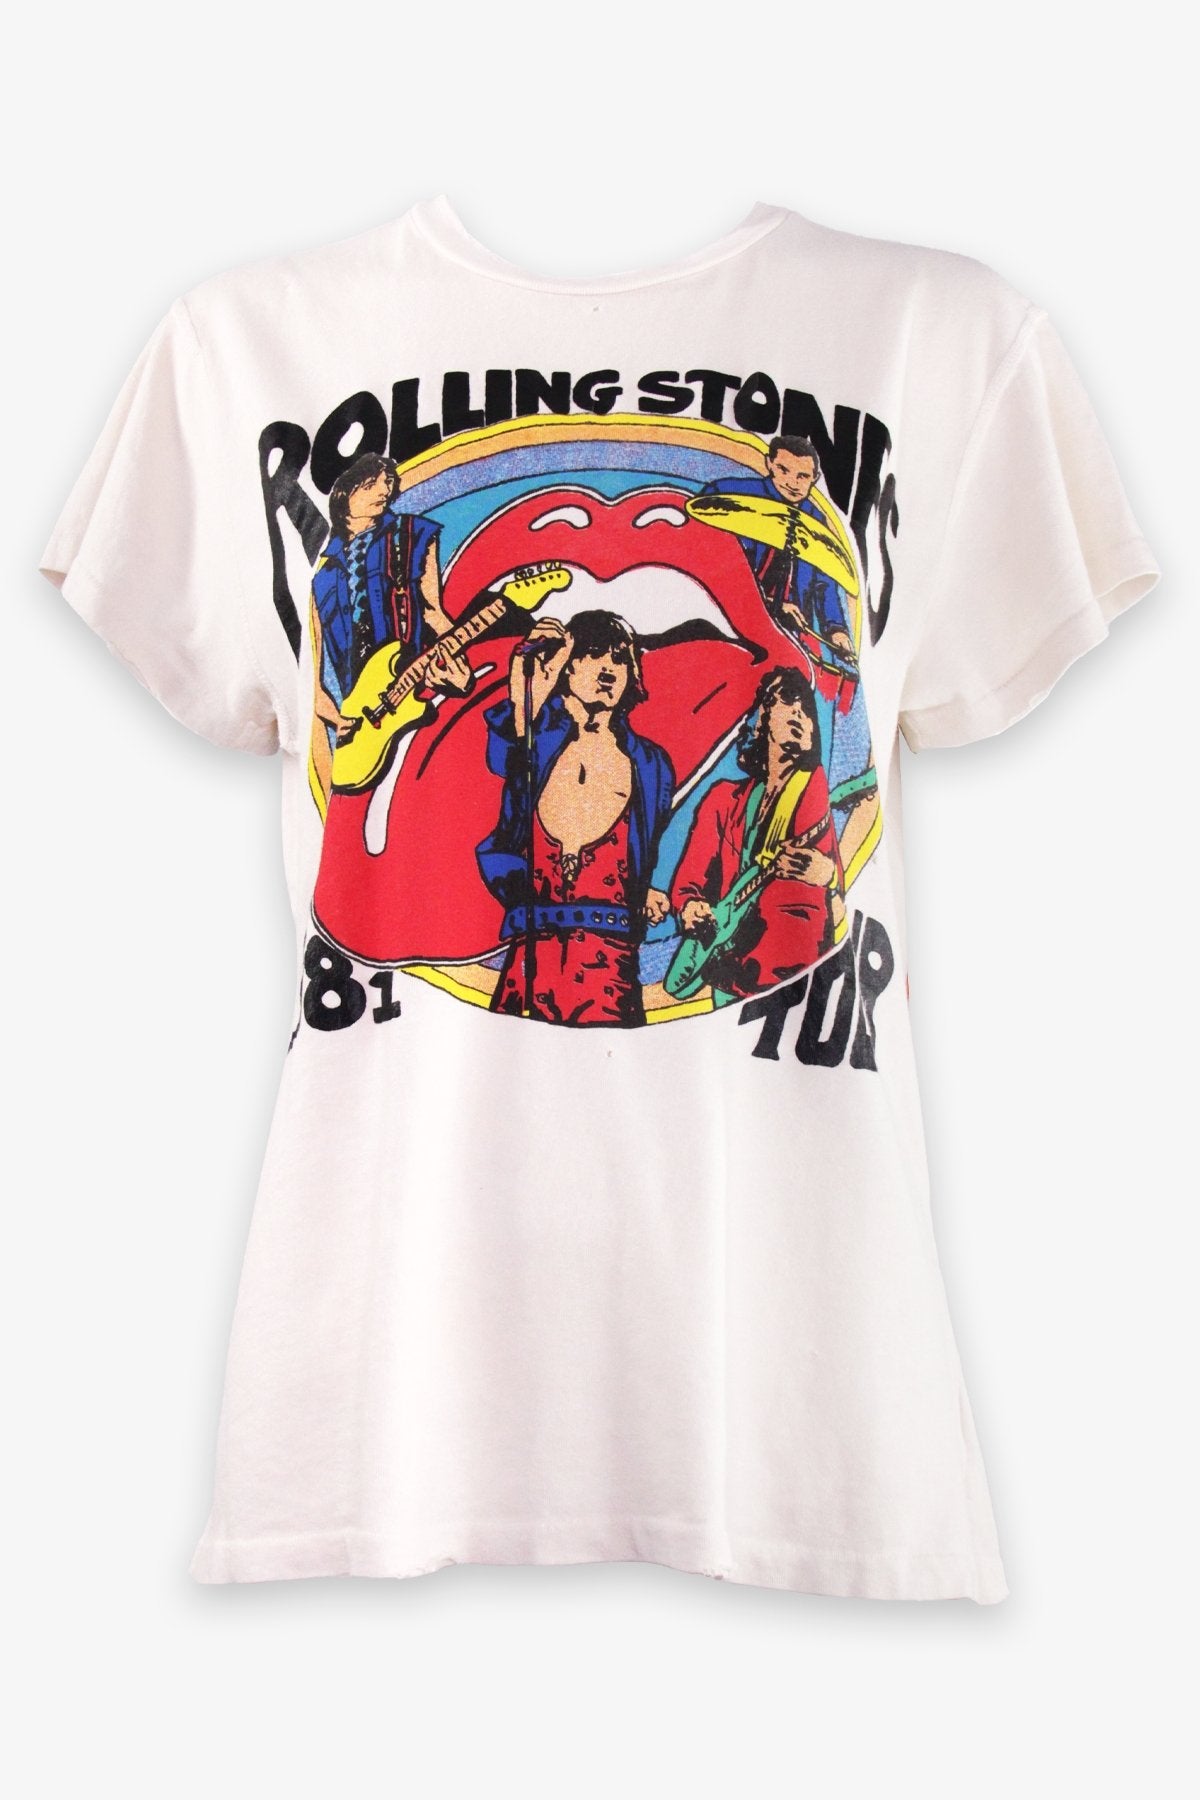 The Rolling Stones Unisex T-Shirt in White - shop-olivia.com